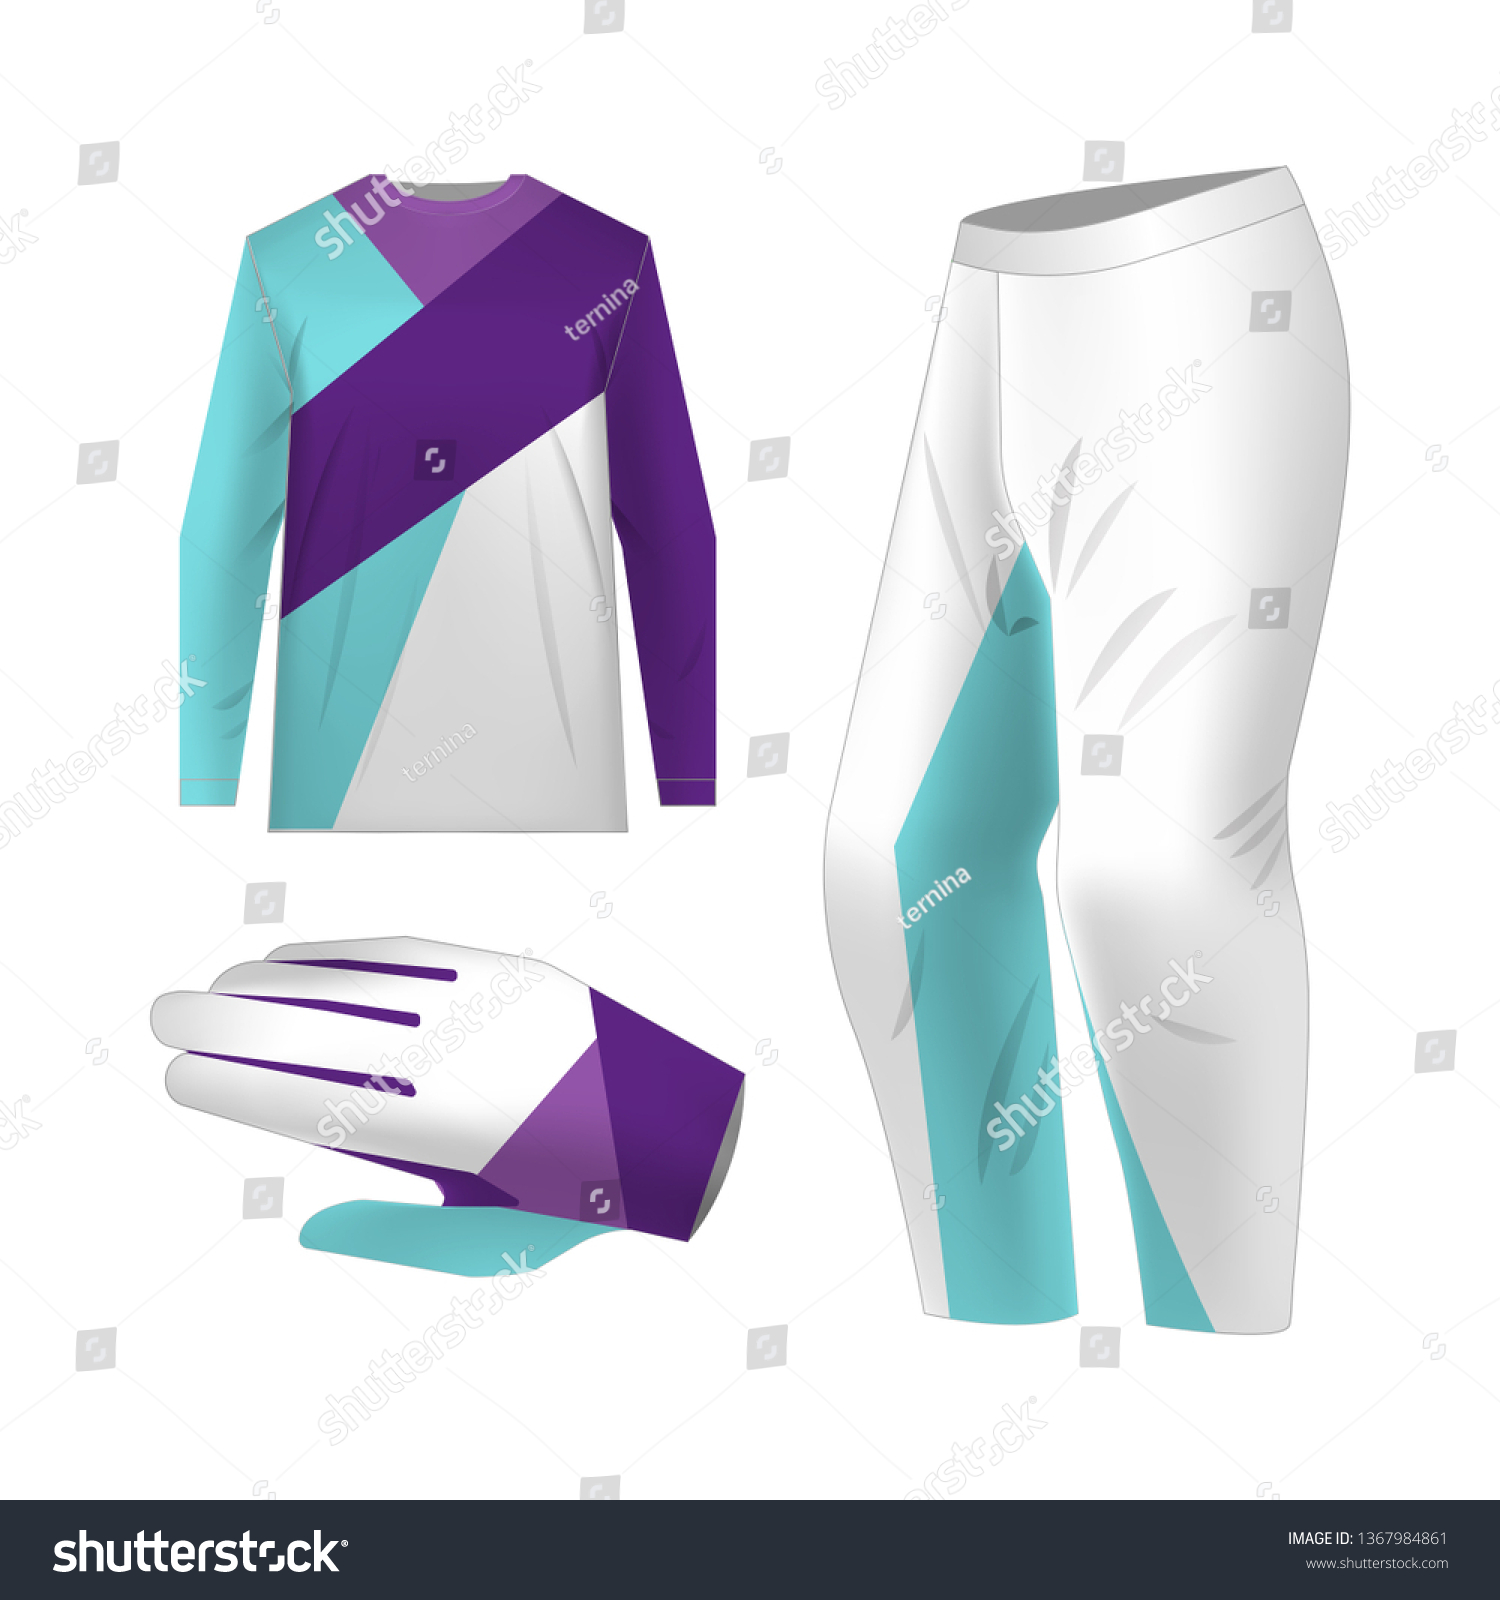 Blank motocross kit mock up. Isolated design templates. Long sleeve jersey, trousers and glove. Total look uniform design. Layout for own team wearing. #1367984861